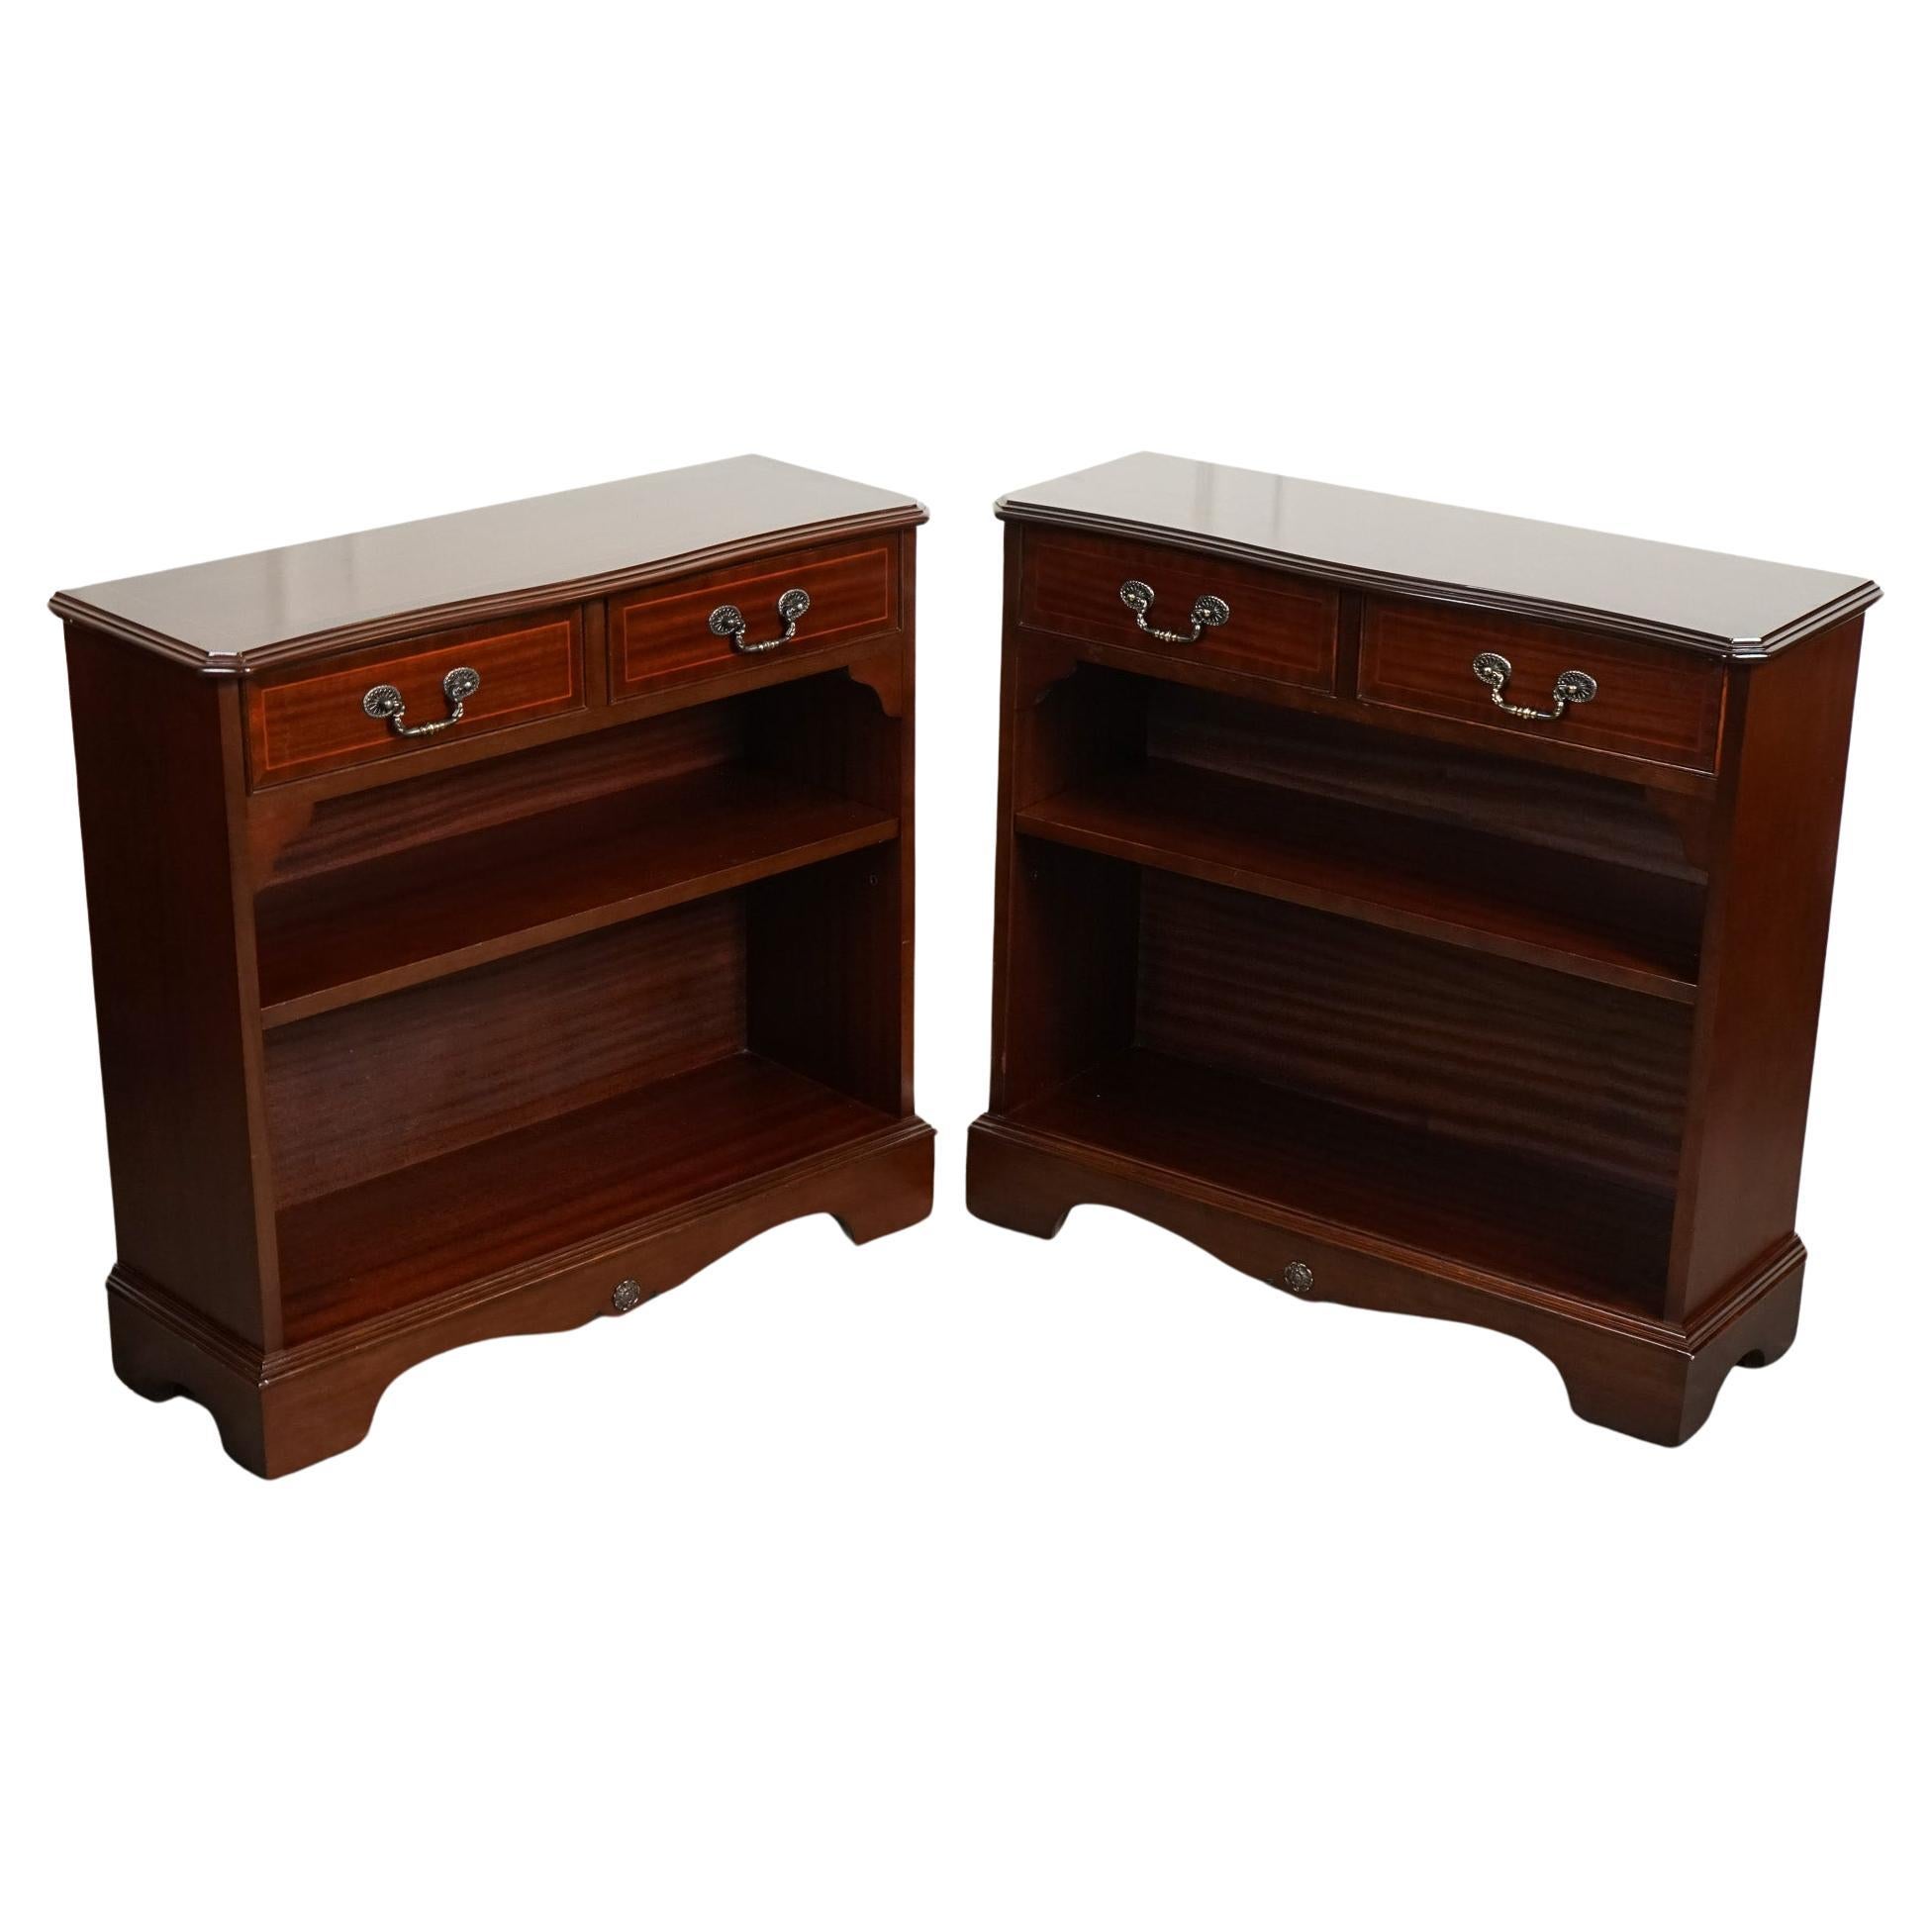 PAIR MAHOGANY OPEN DWARF LIBRARY BOOKCASES ADJUSTABLE SHELVES j1